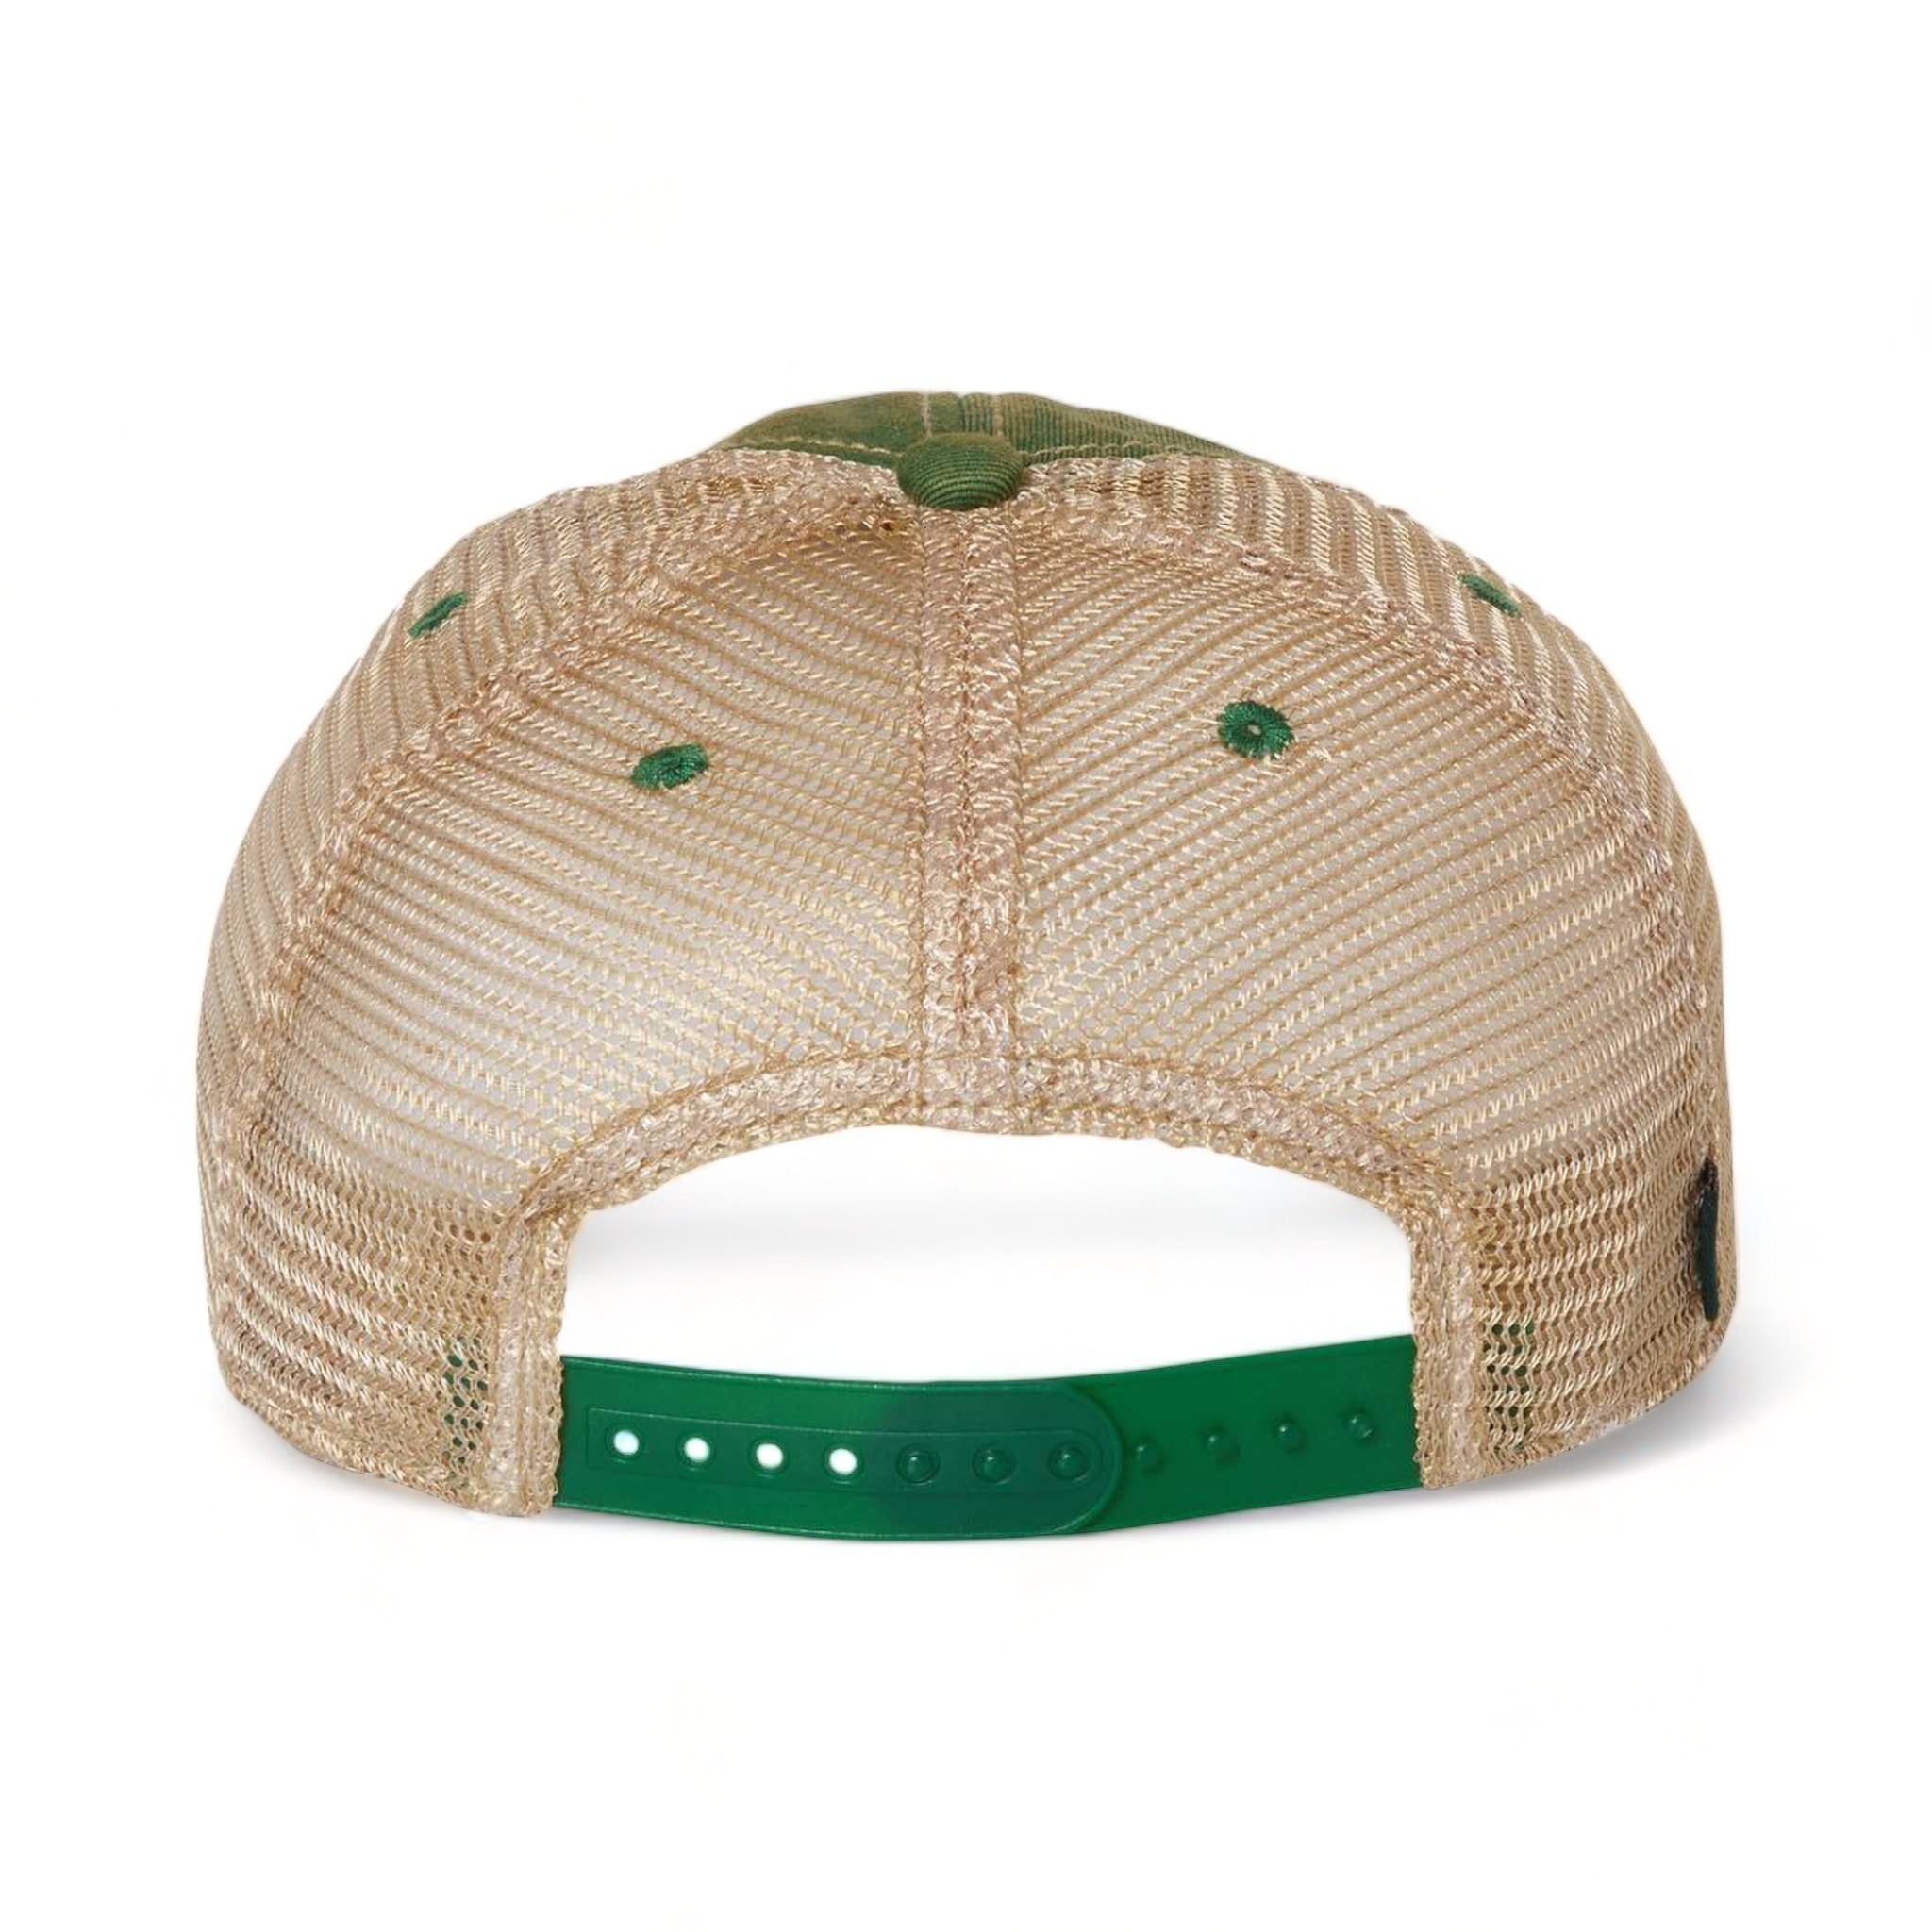 Back view of LEGACY OFA custom hat in kelly green and khaki